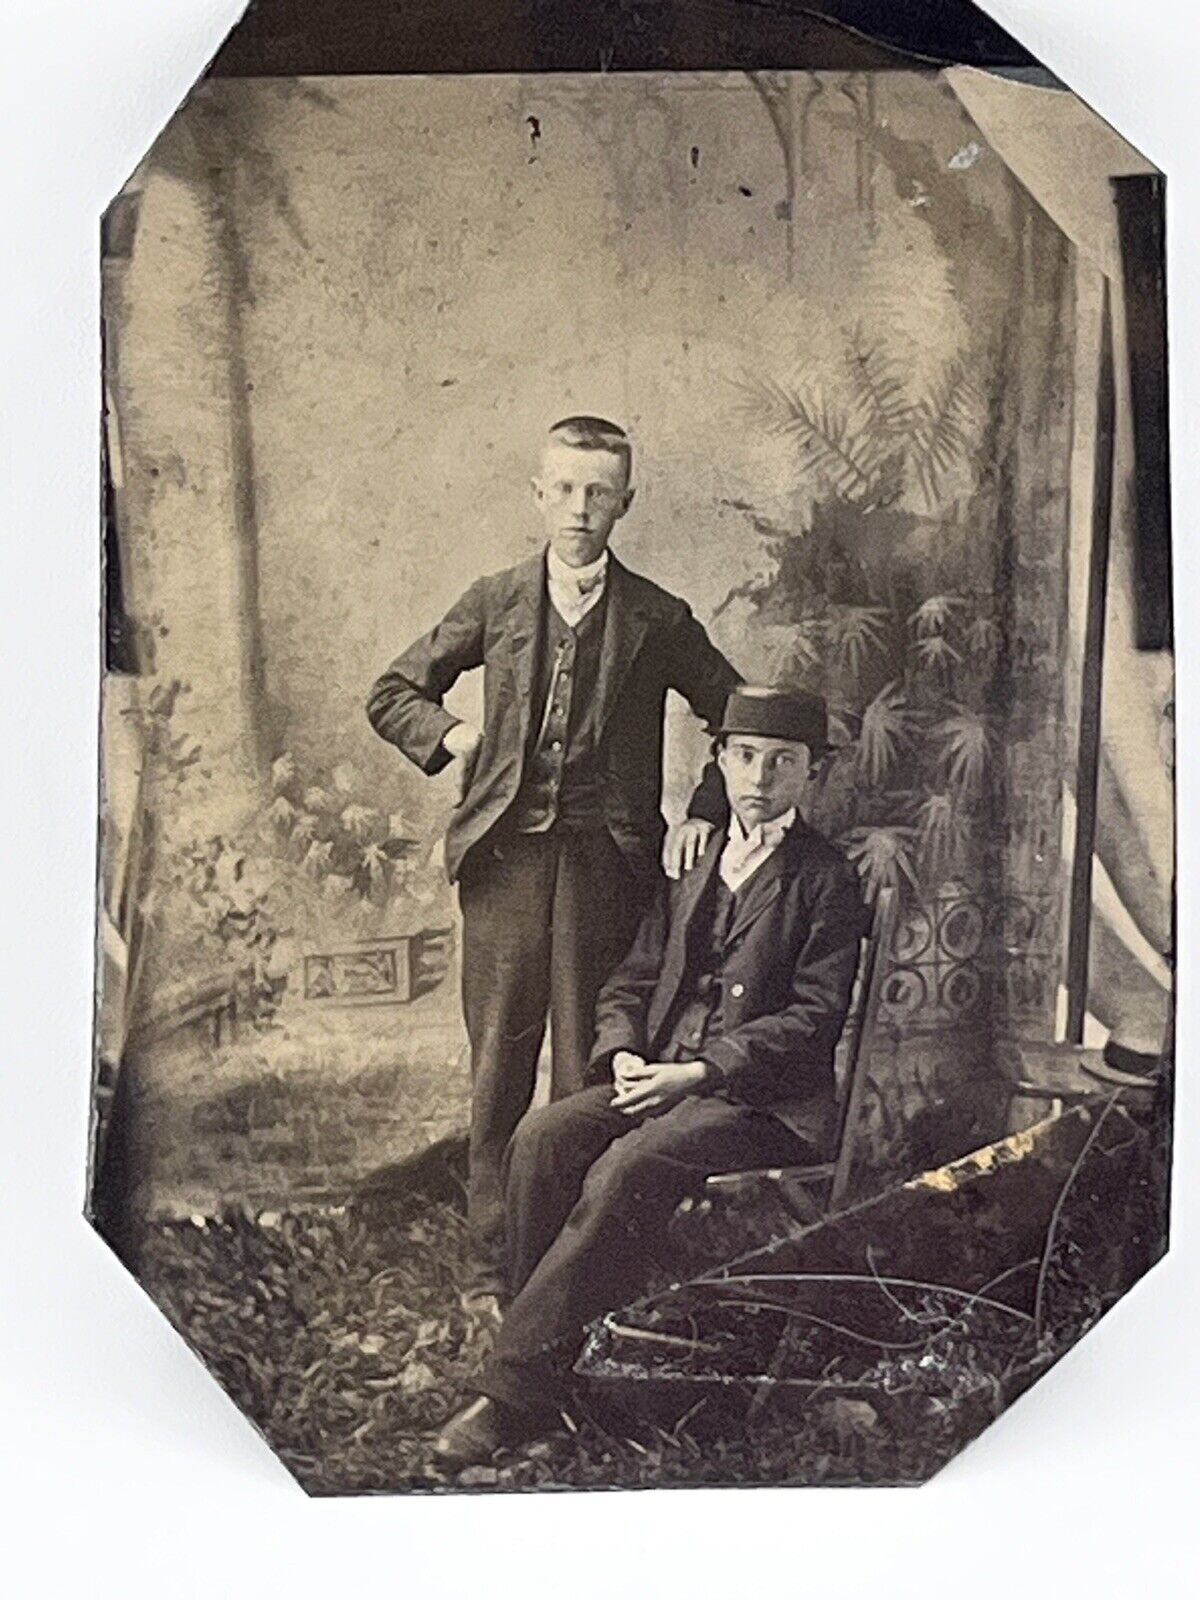 TINTYPE STUDIO PORTRAIT 2 Young Boys BROTHERS, NICE SUITS And Hat